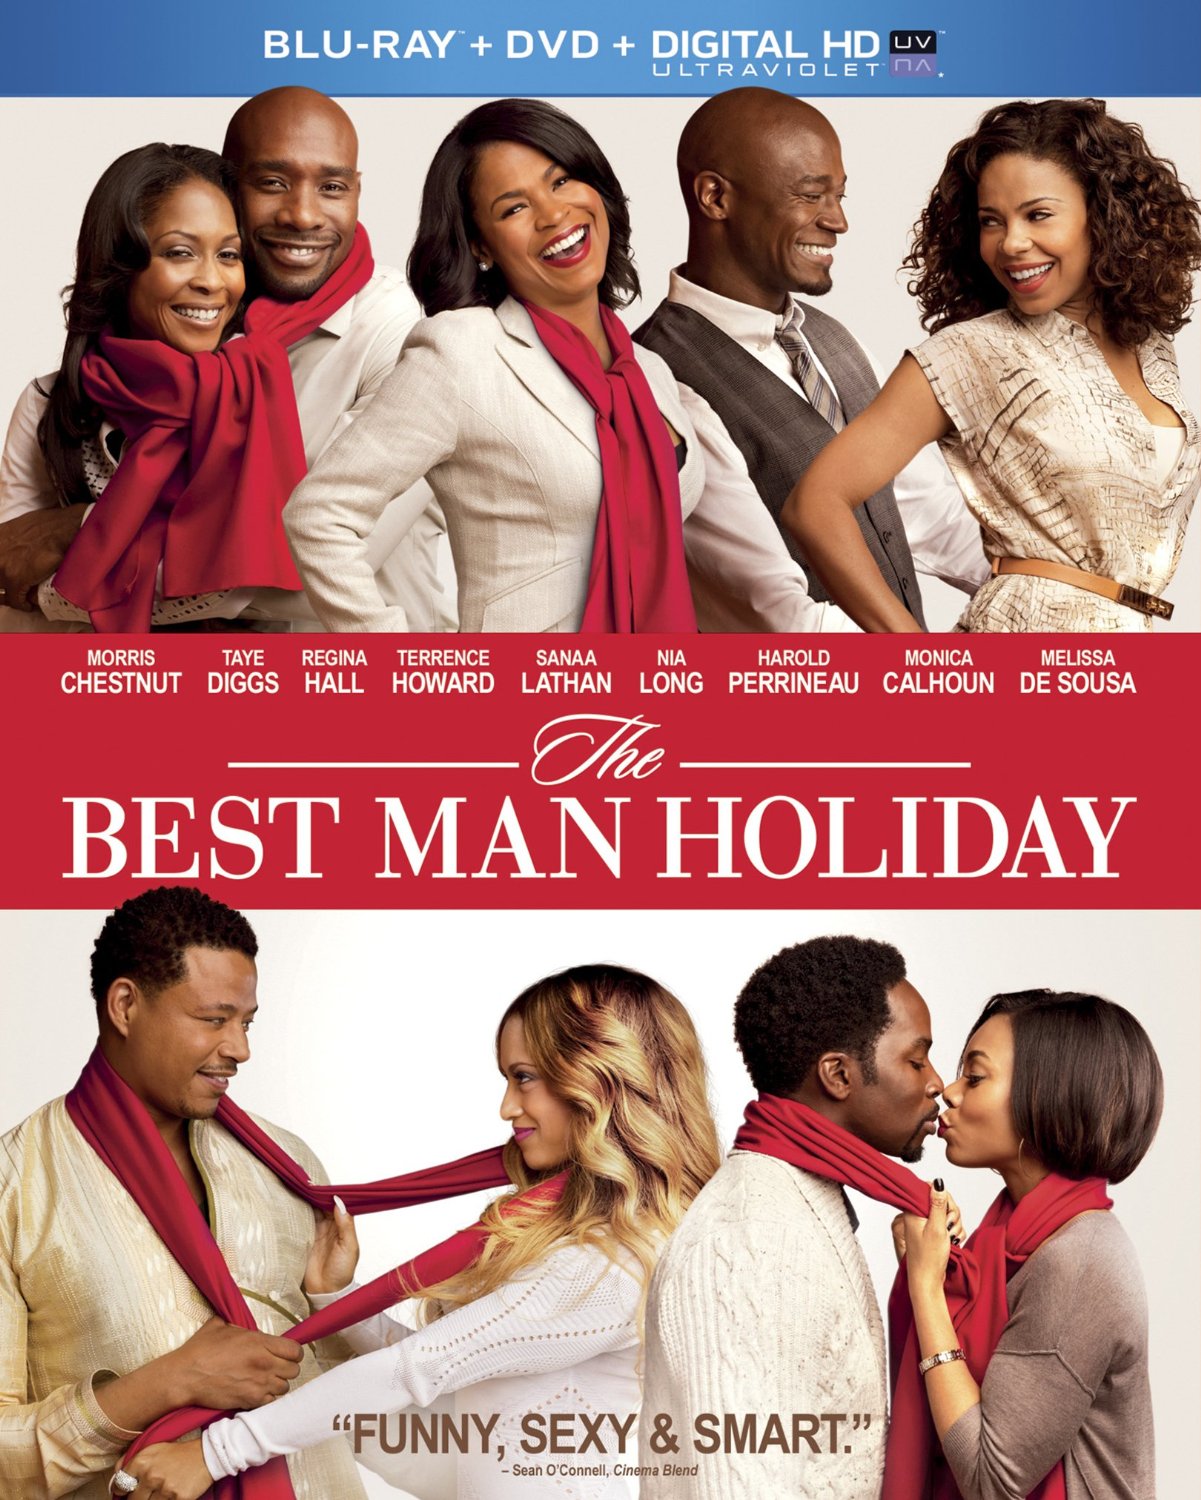 The Best Man Holiday Movie Poster